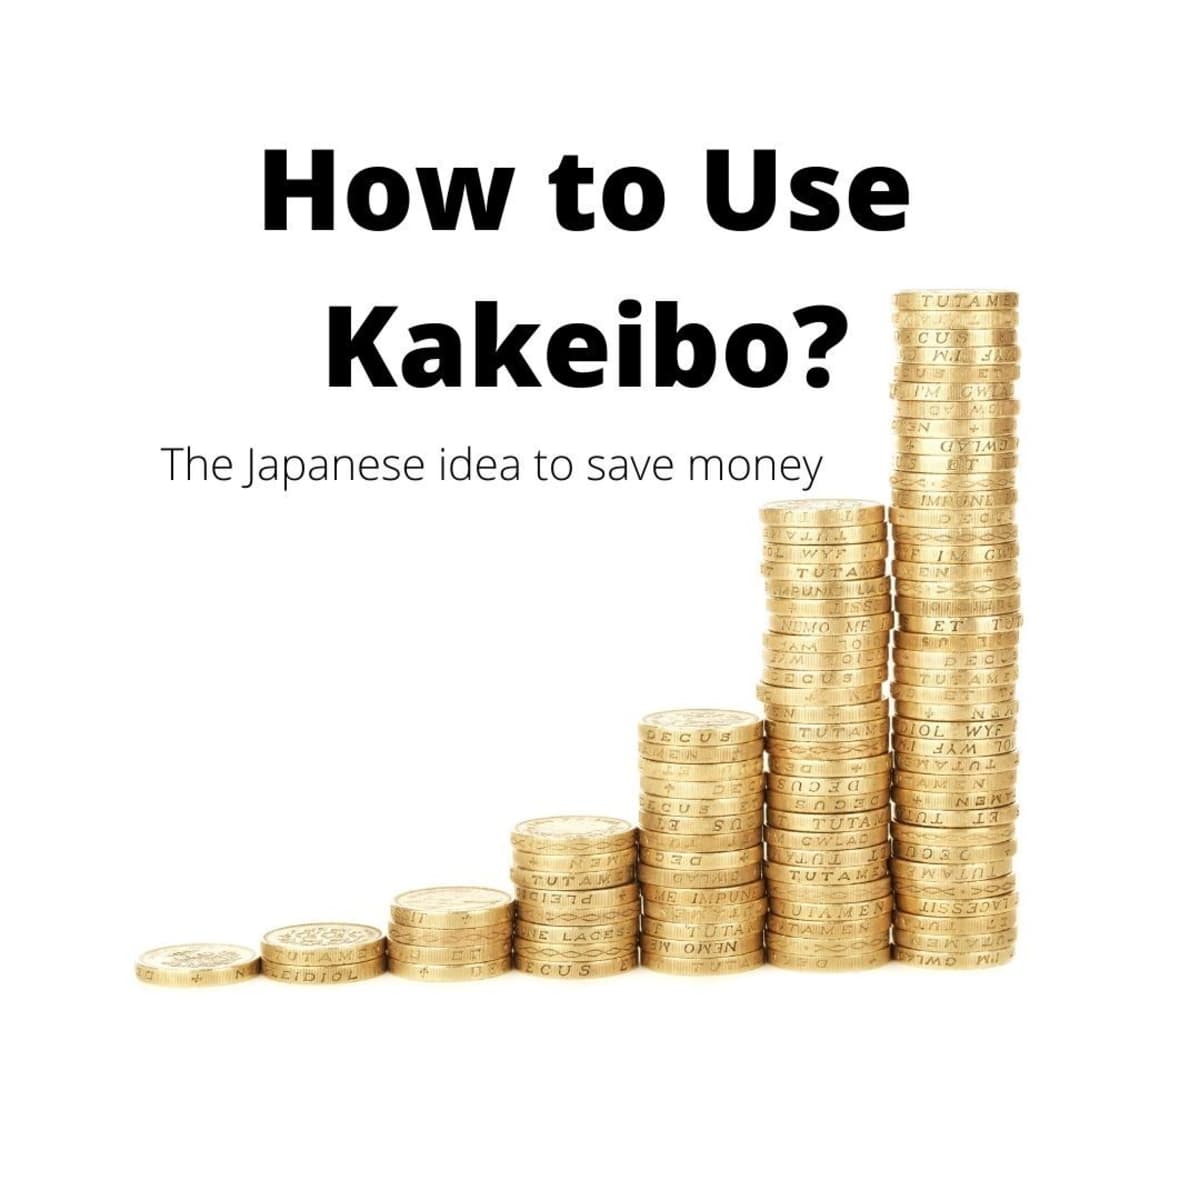 How to Improve Your Savings by Kakeibo? The Japanese Idea to Save